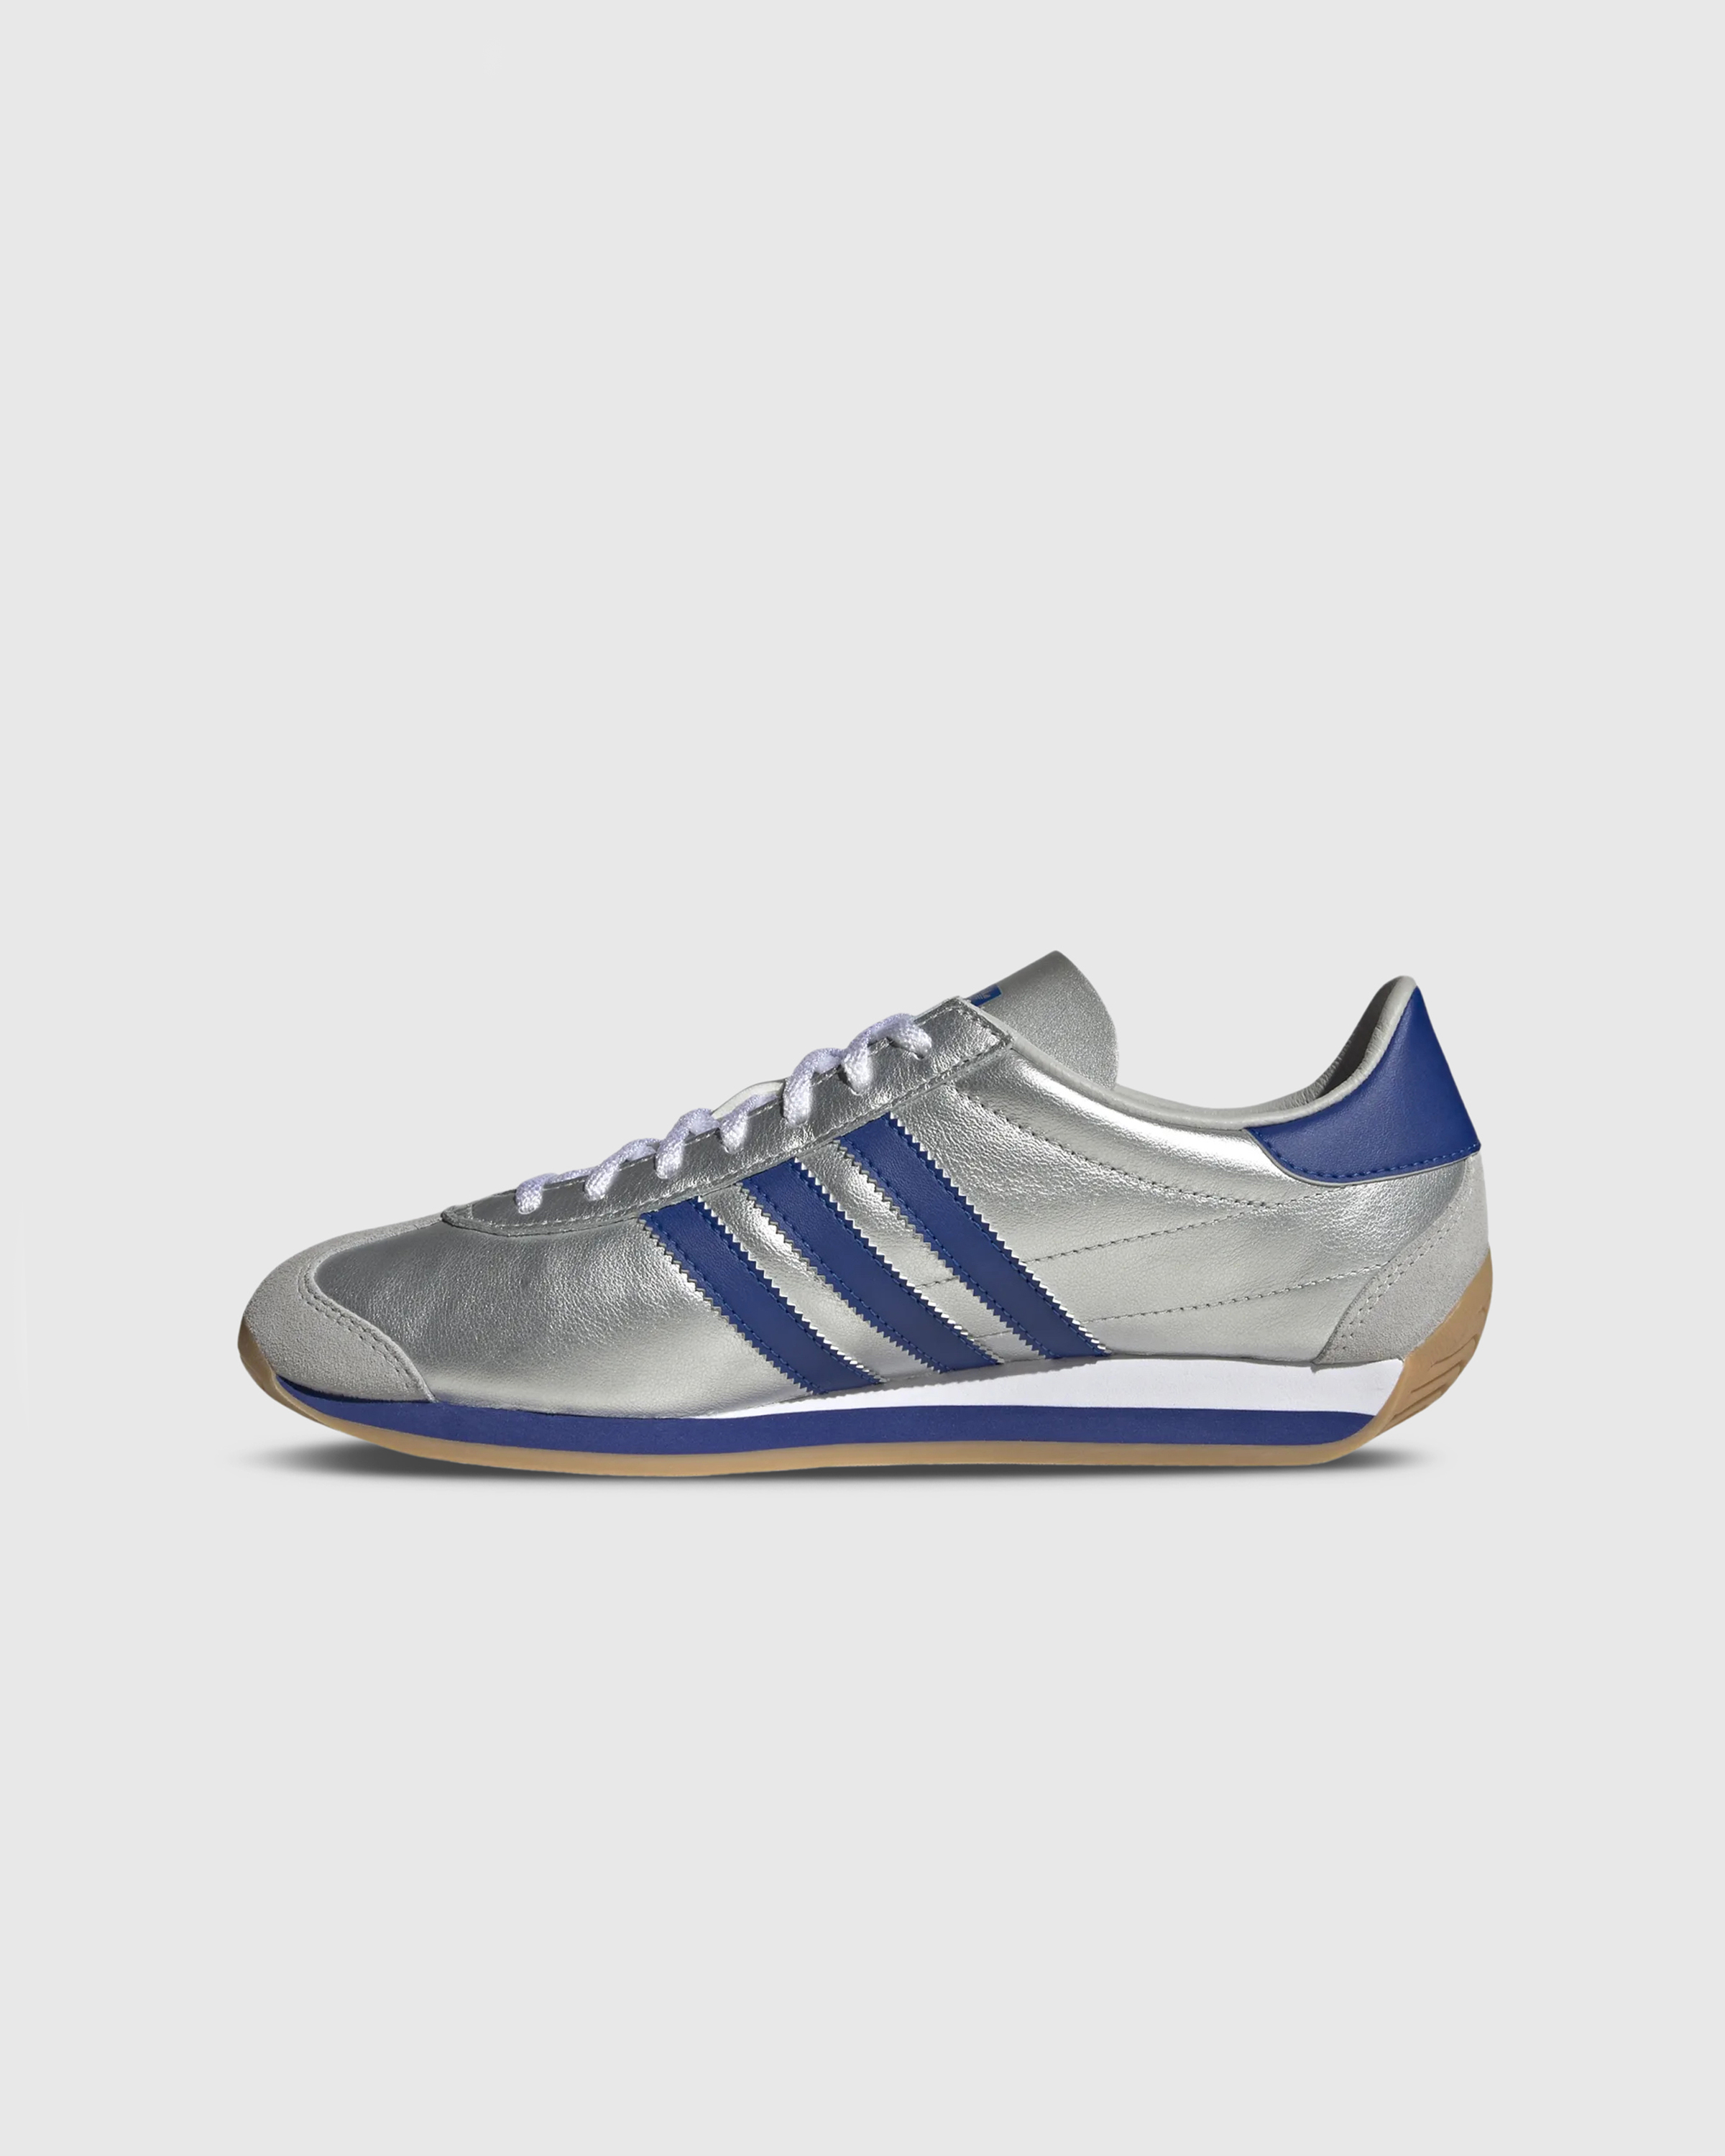 Adidas – Country OG Matte Silver - Sneakers - Silver - Image 2